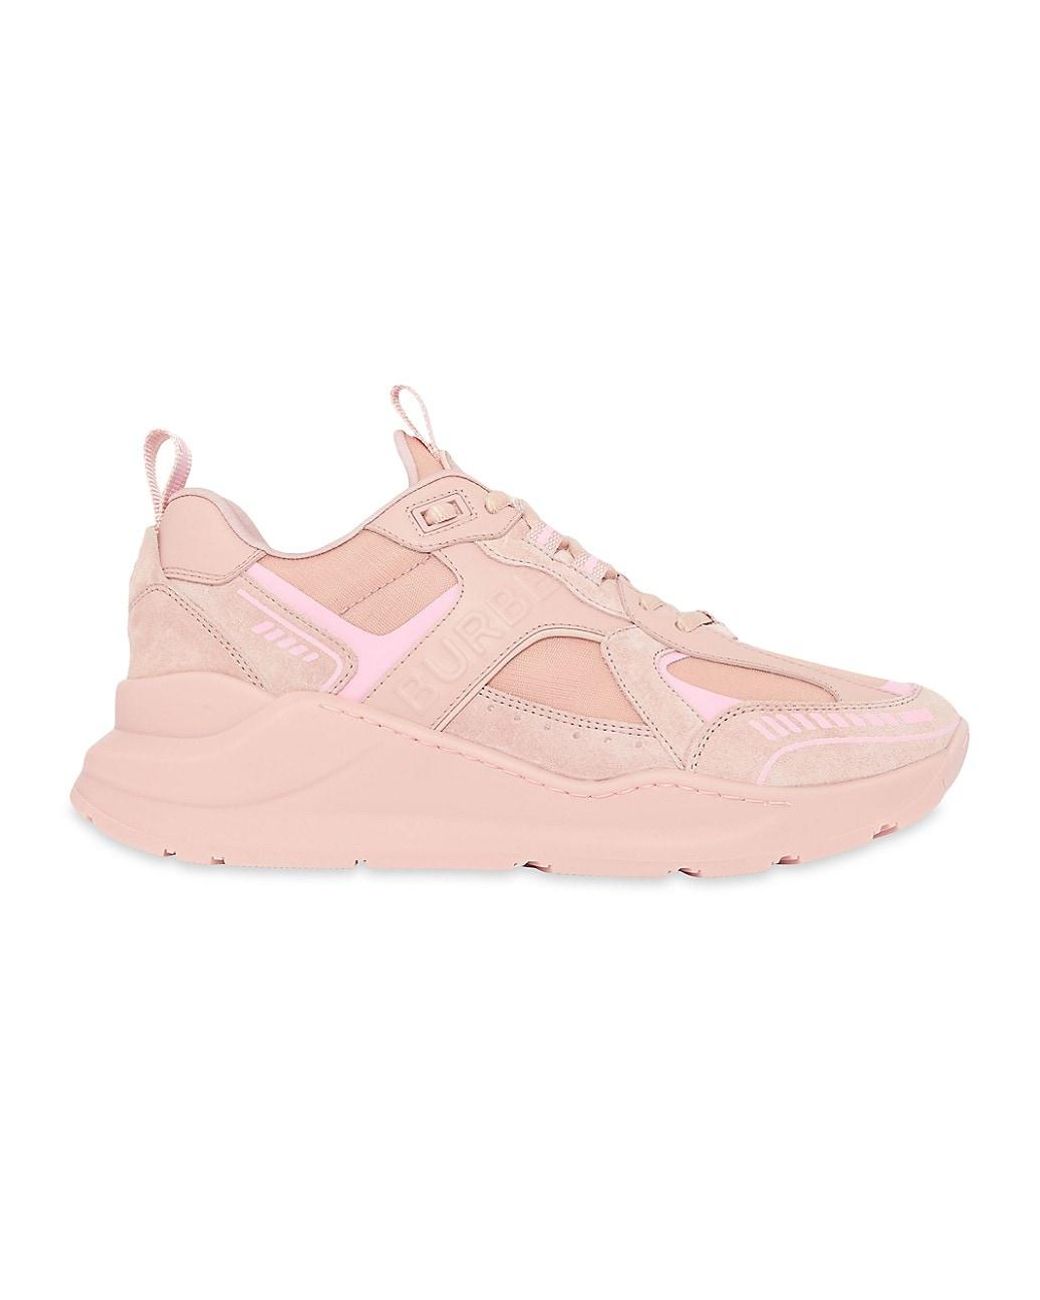 Burberry Sean Pieced Leather Sneakers in Pink | Lyst